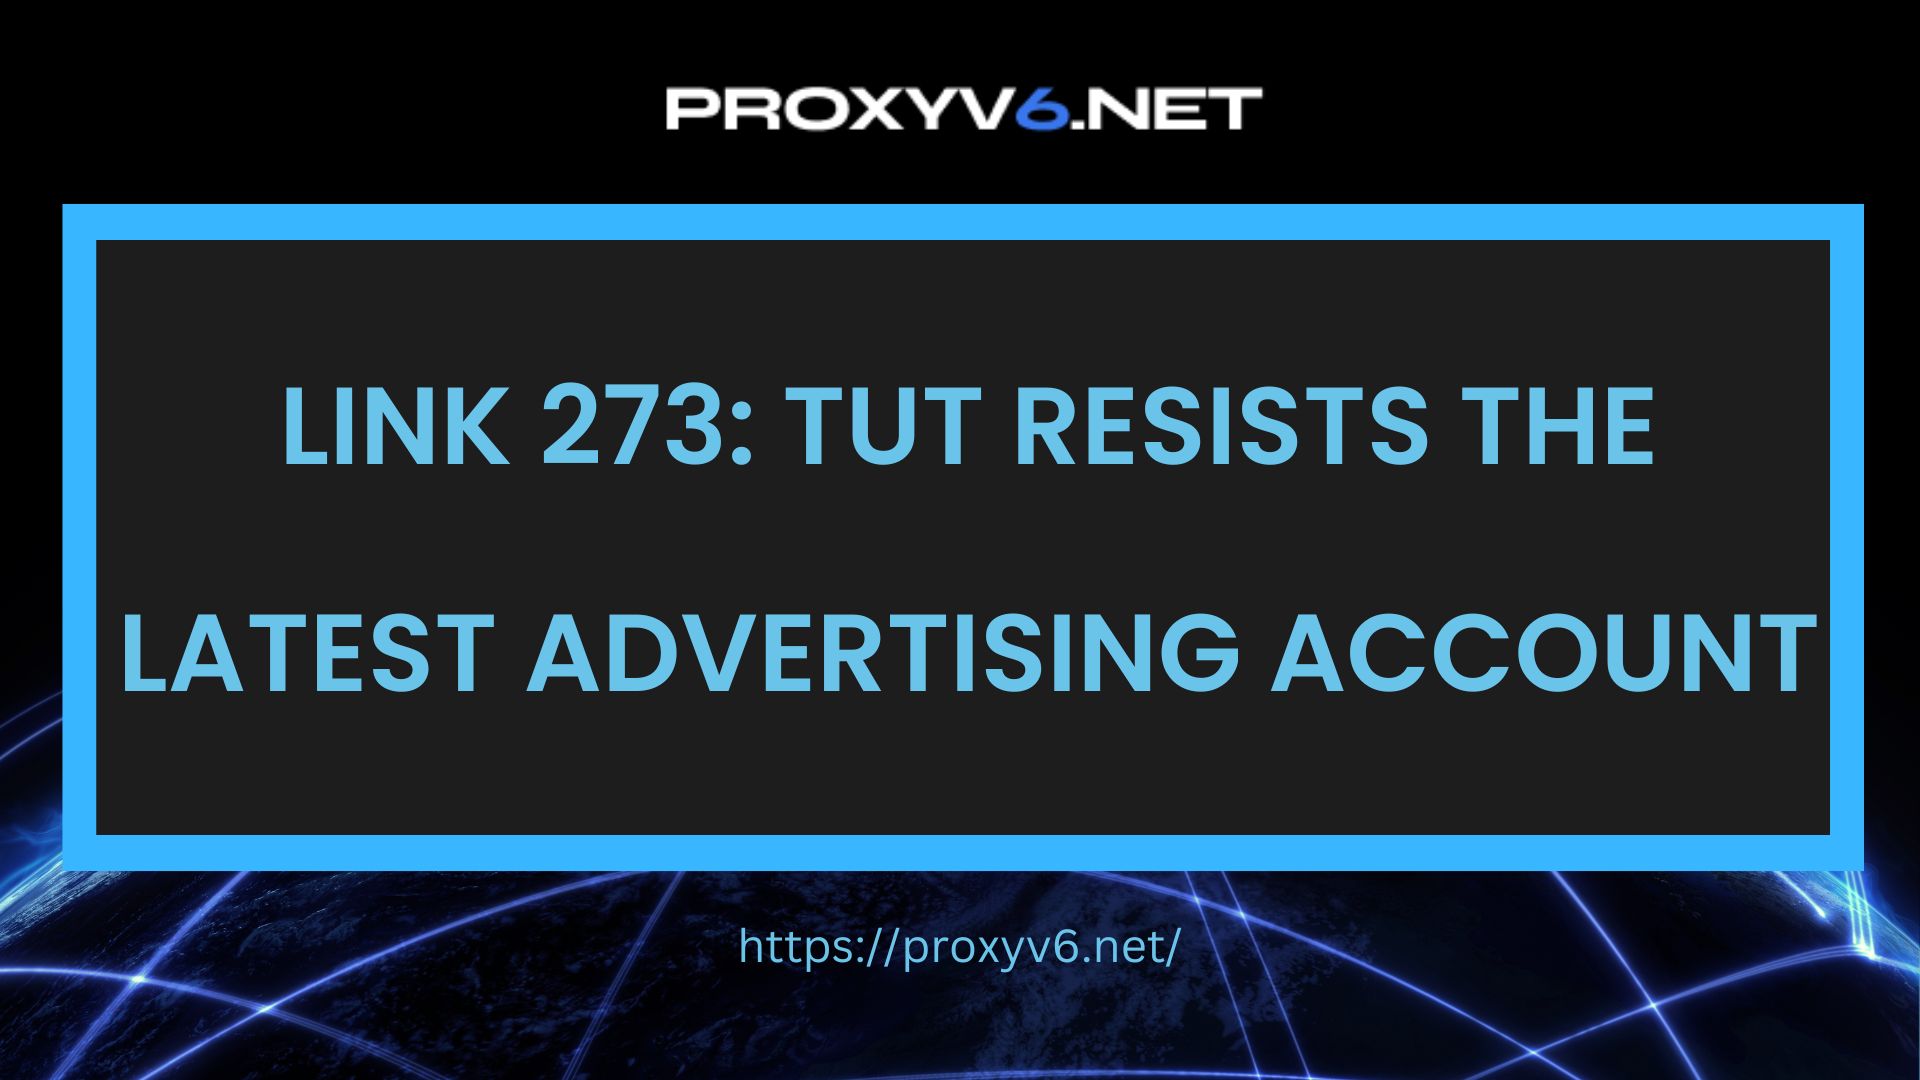 Link 273: TUT resists the latest advertising account